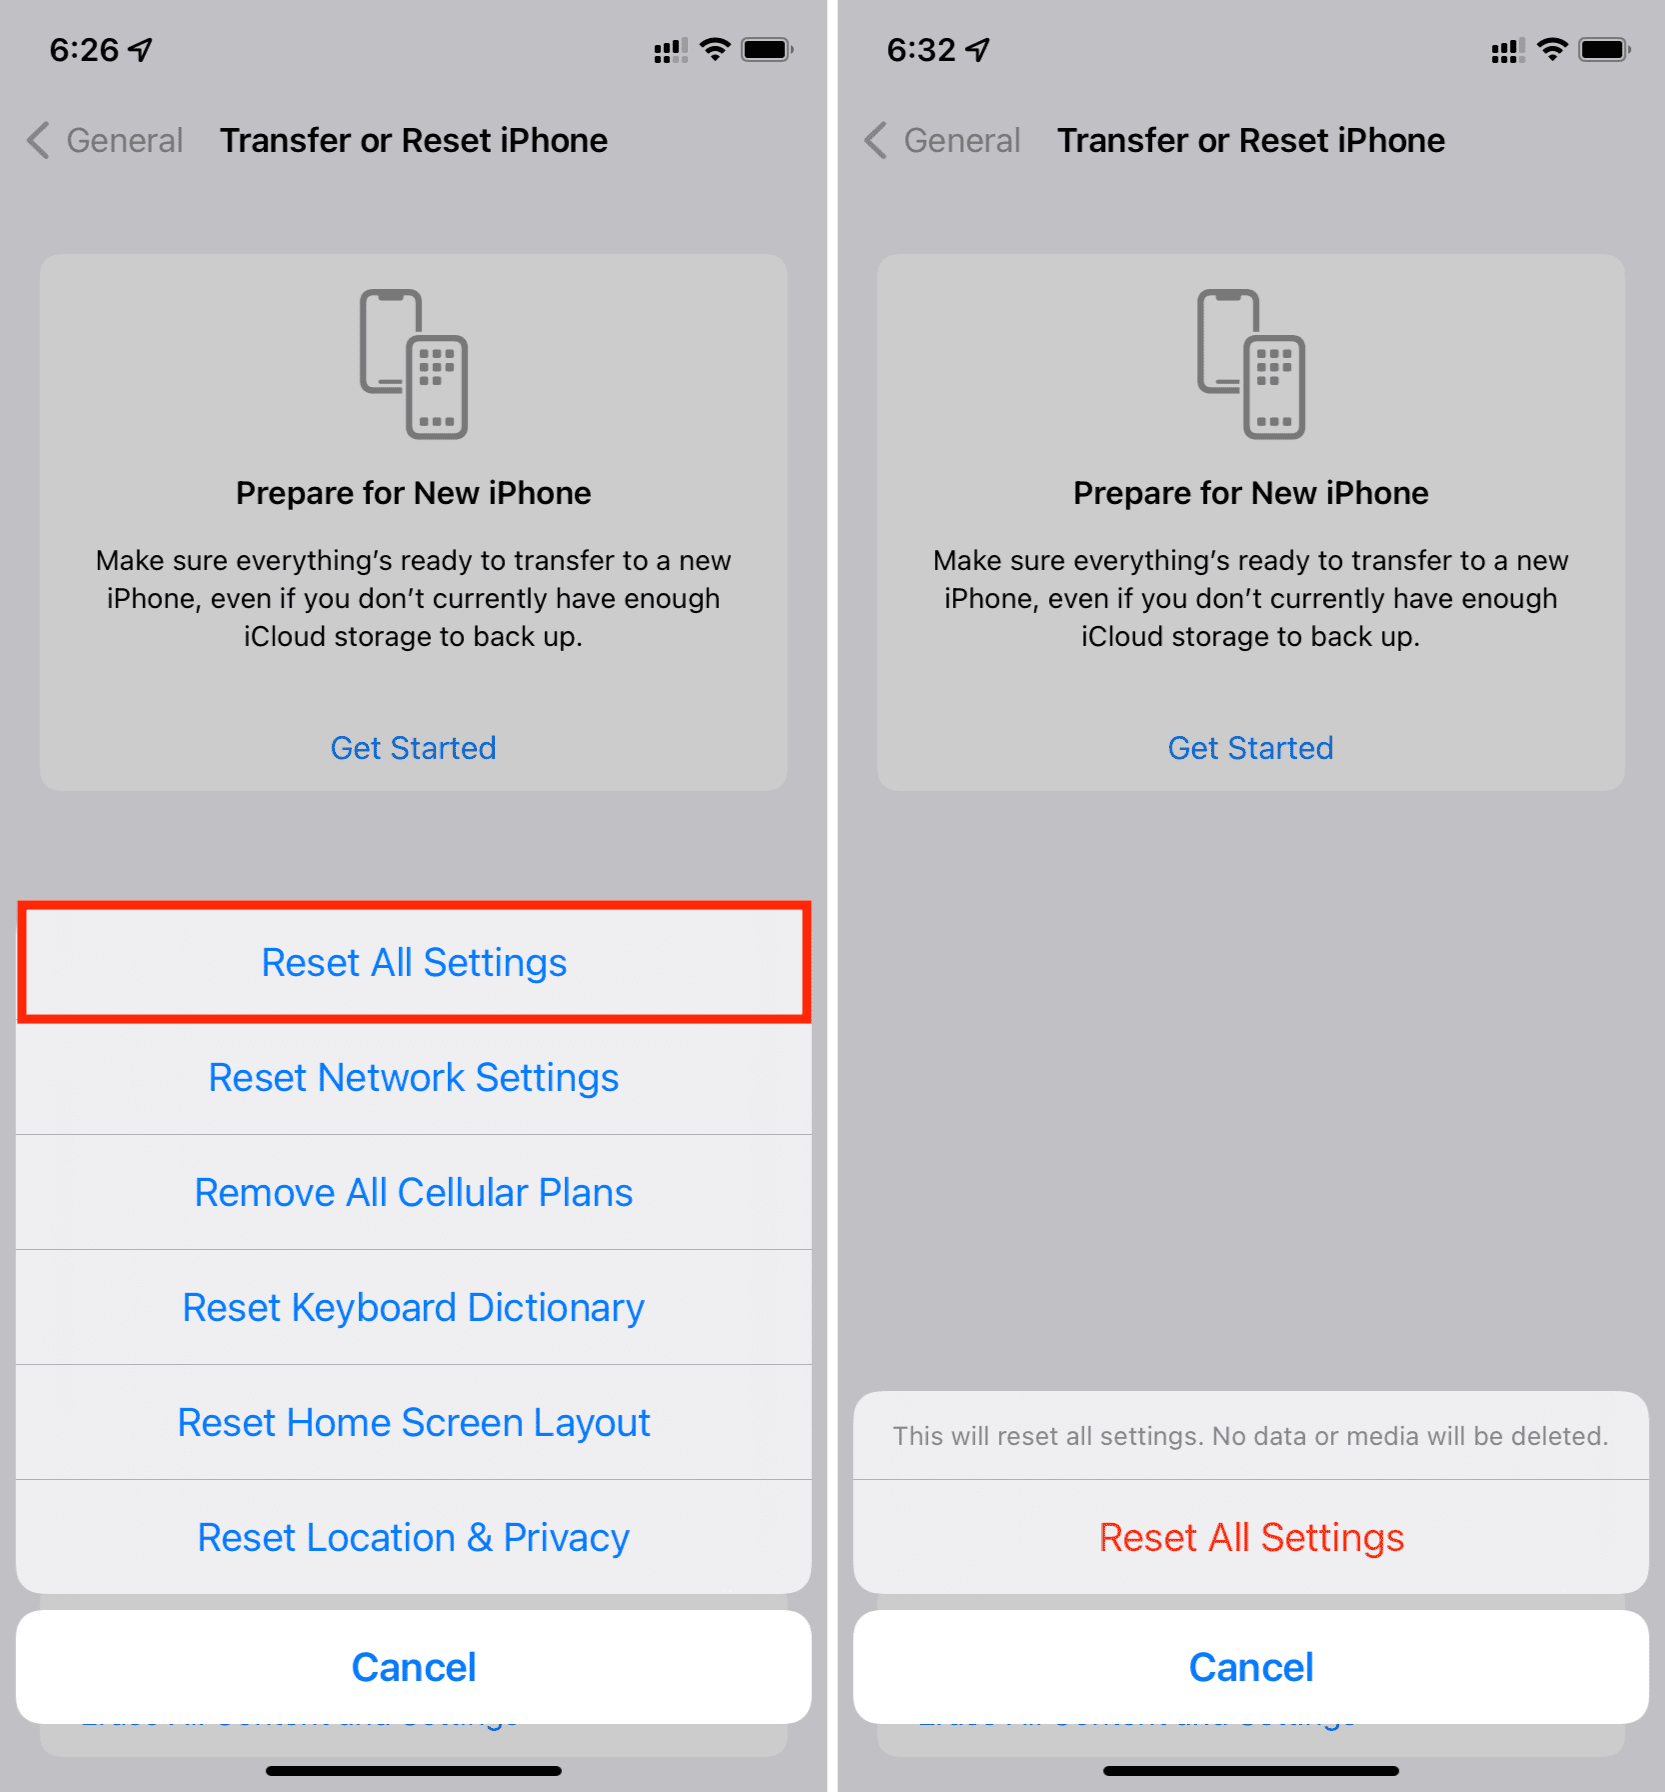 Reset all settings on the iPhone
Perform a factory reset